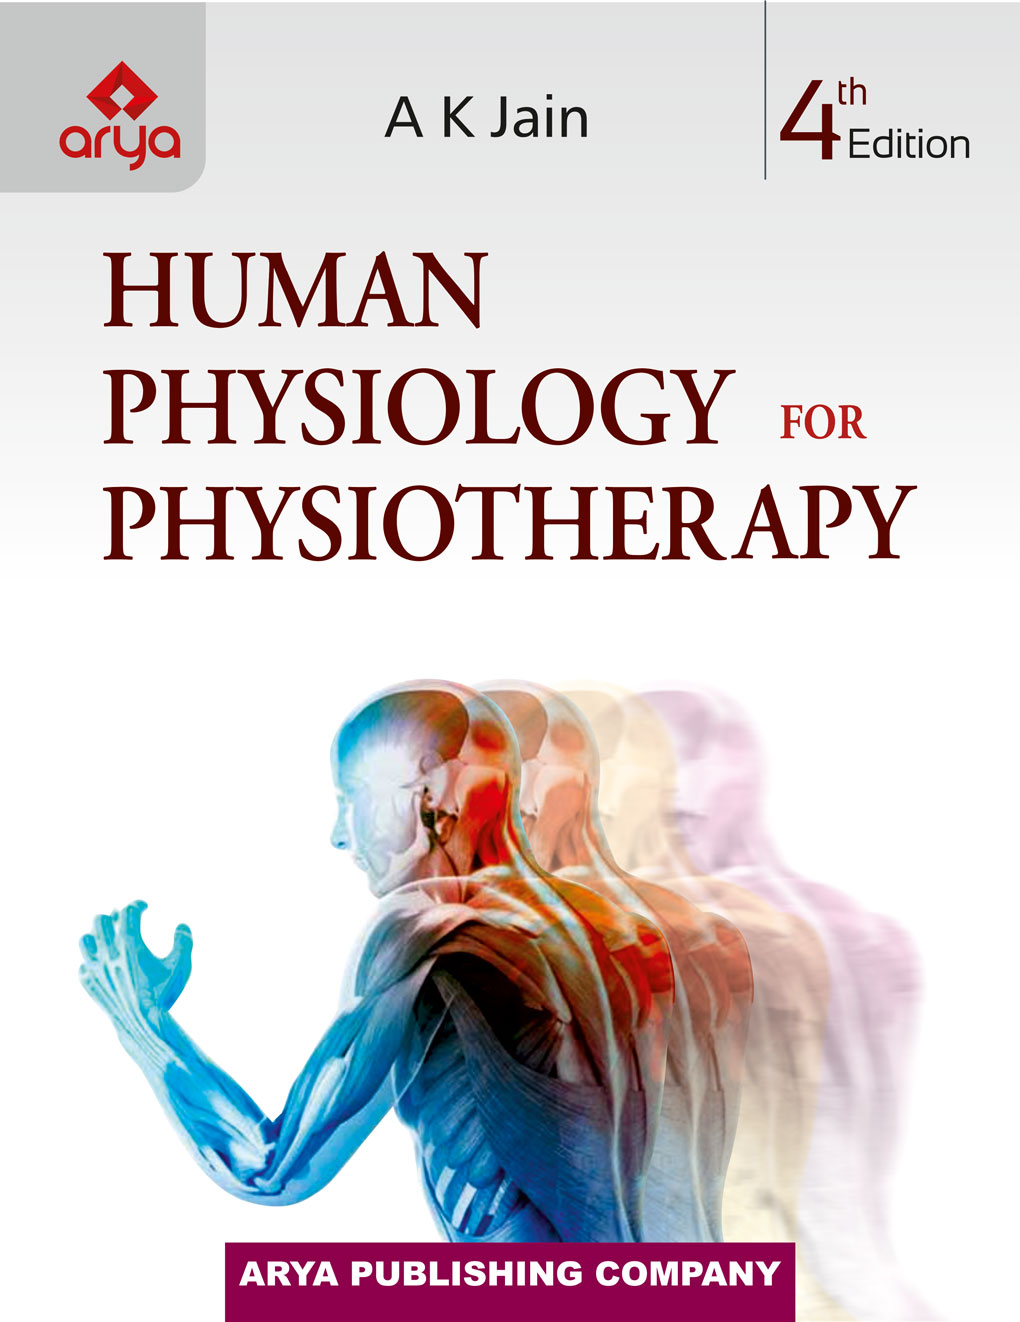 Human Physiology for Physiotherapy 